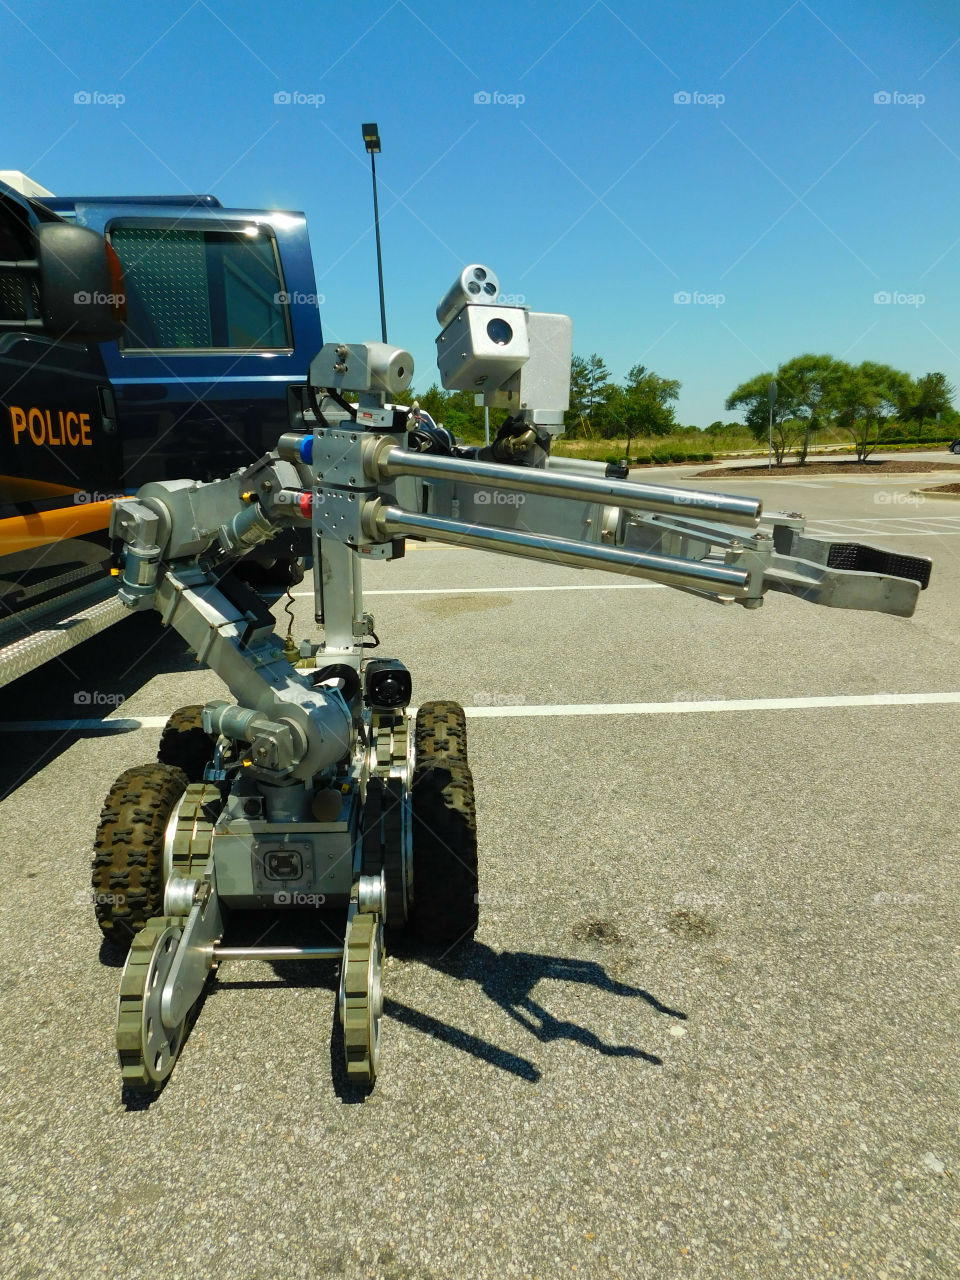 State of Florida Bomb Squad with their explosive detection and bomb removal Robot! Trained to alert,detect and remove explosive devises remotely!